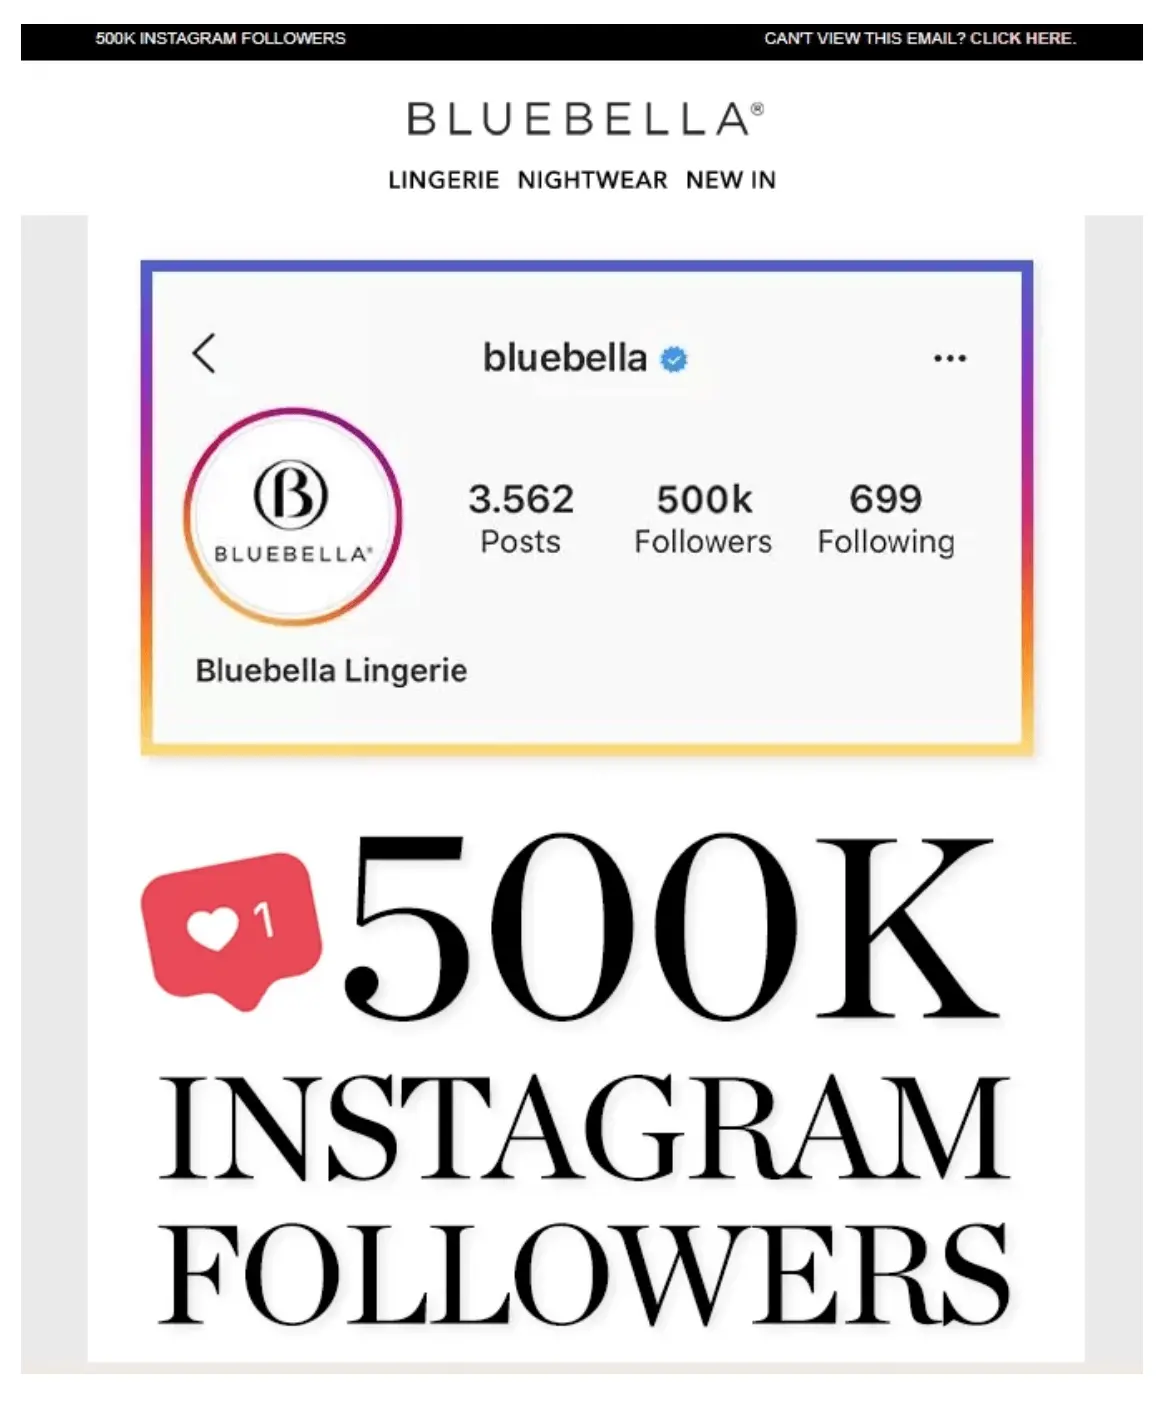 Bluebelle Lingerie informs its email subscribers about its 500k Instagram followers milestone